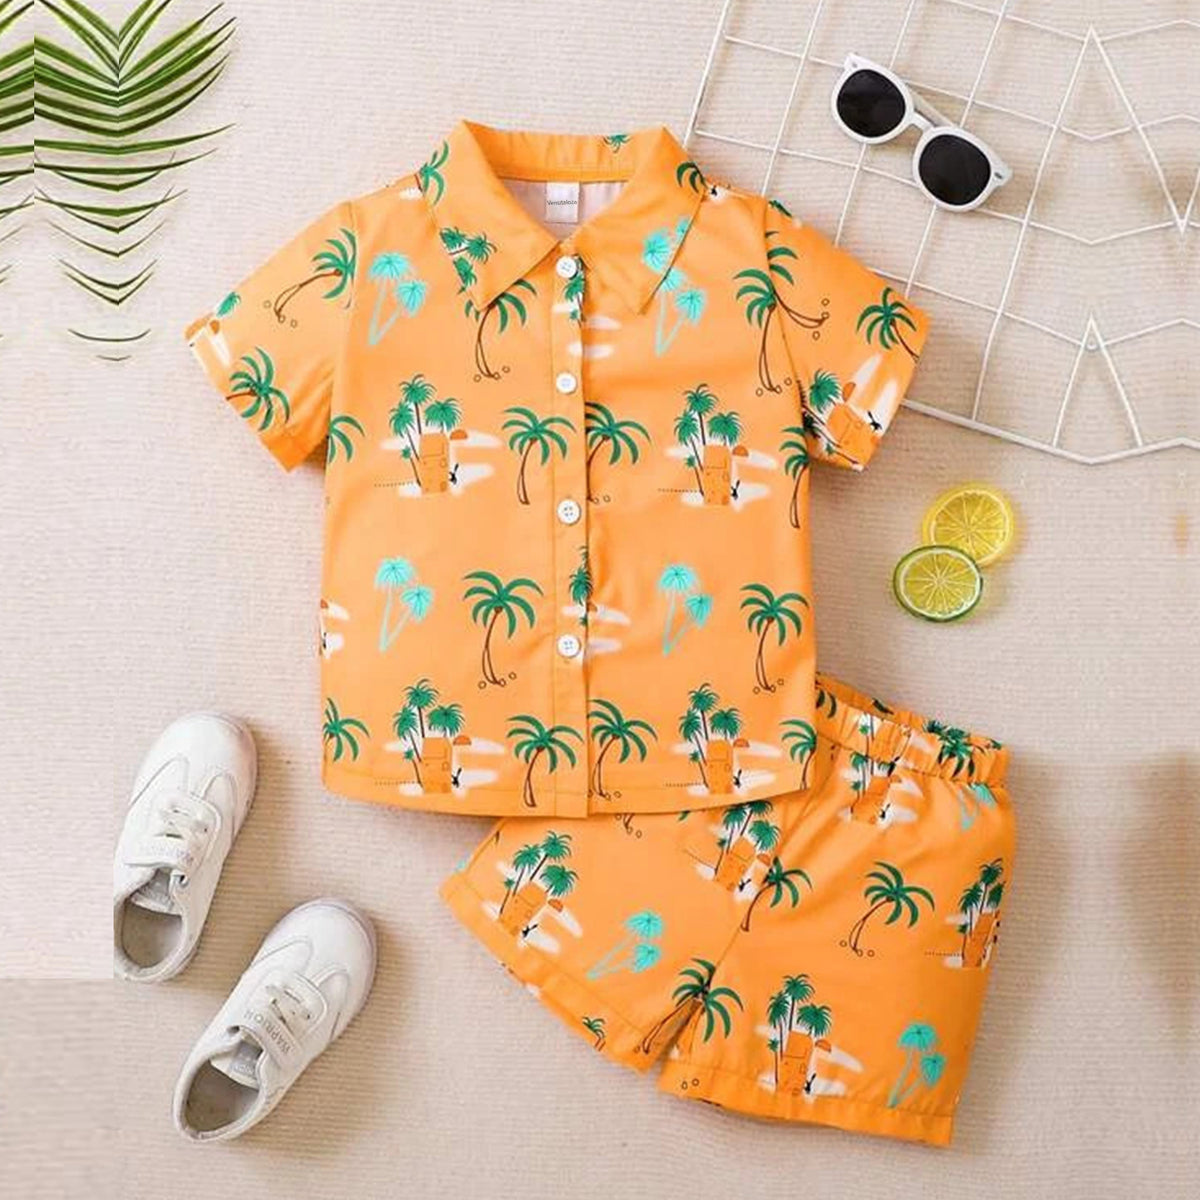 Venutaloza Baby Set Casual Letters & Coconut Tree (Combo Pack Of 2) Shirt & Shorts Without tee Two Piece Set For Boy & Girls.